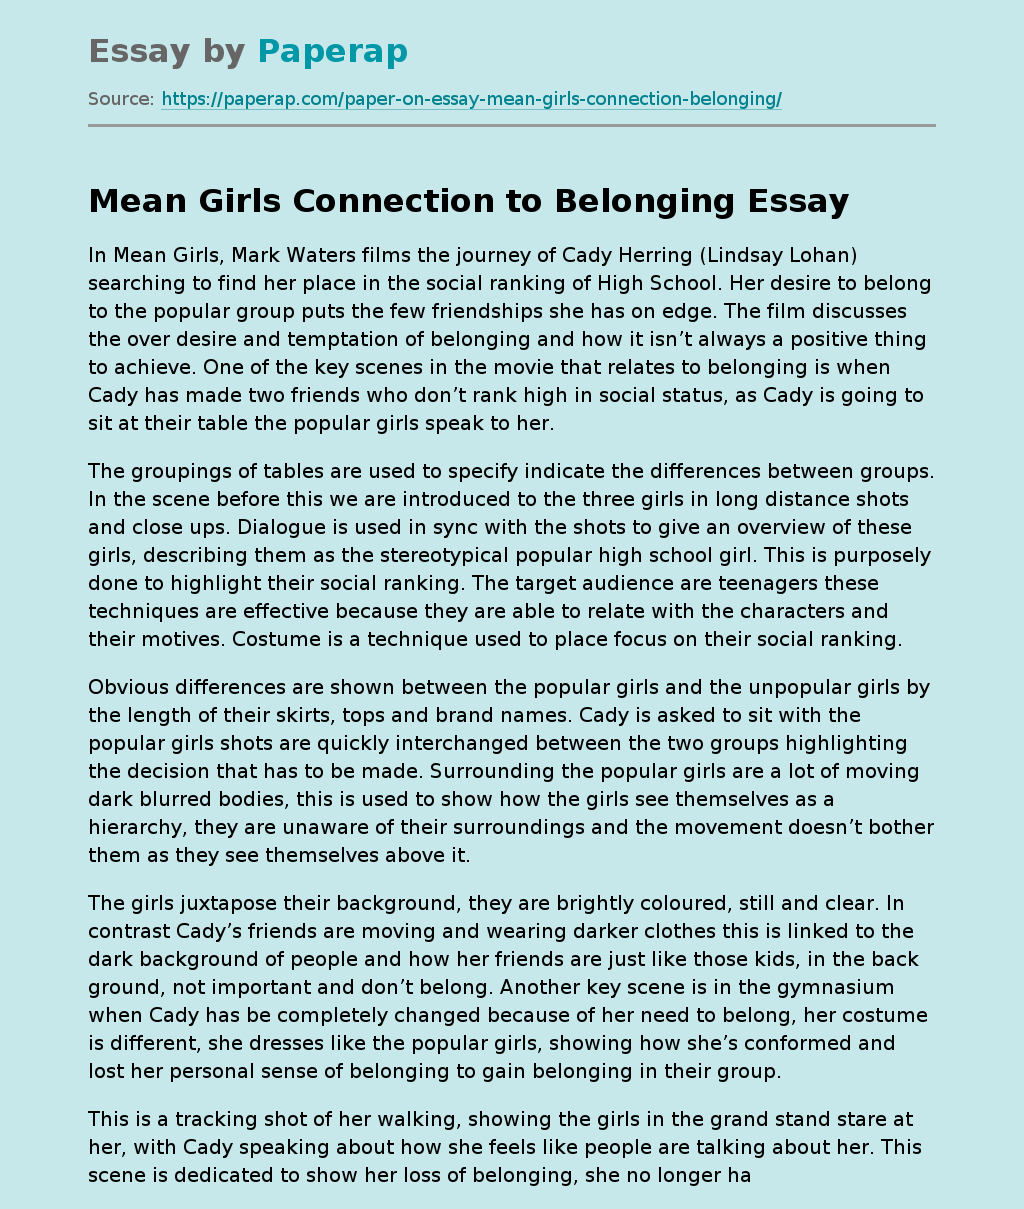 Mean Girls Connection to Belonging